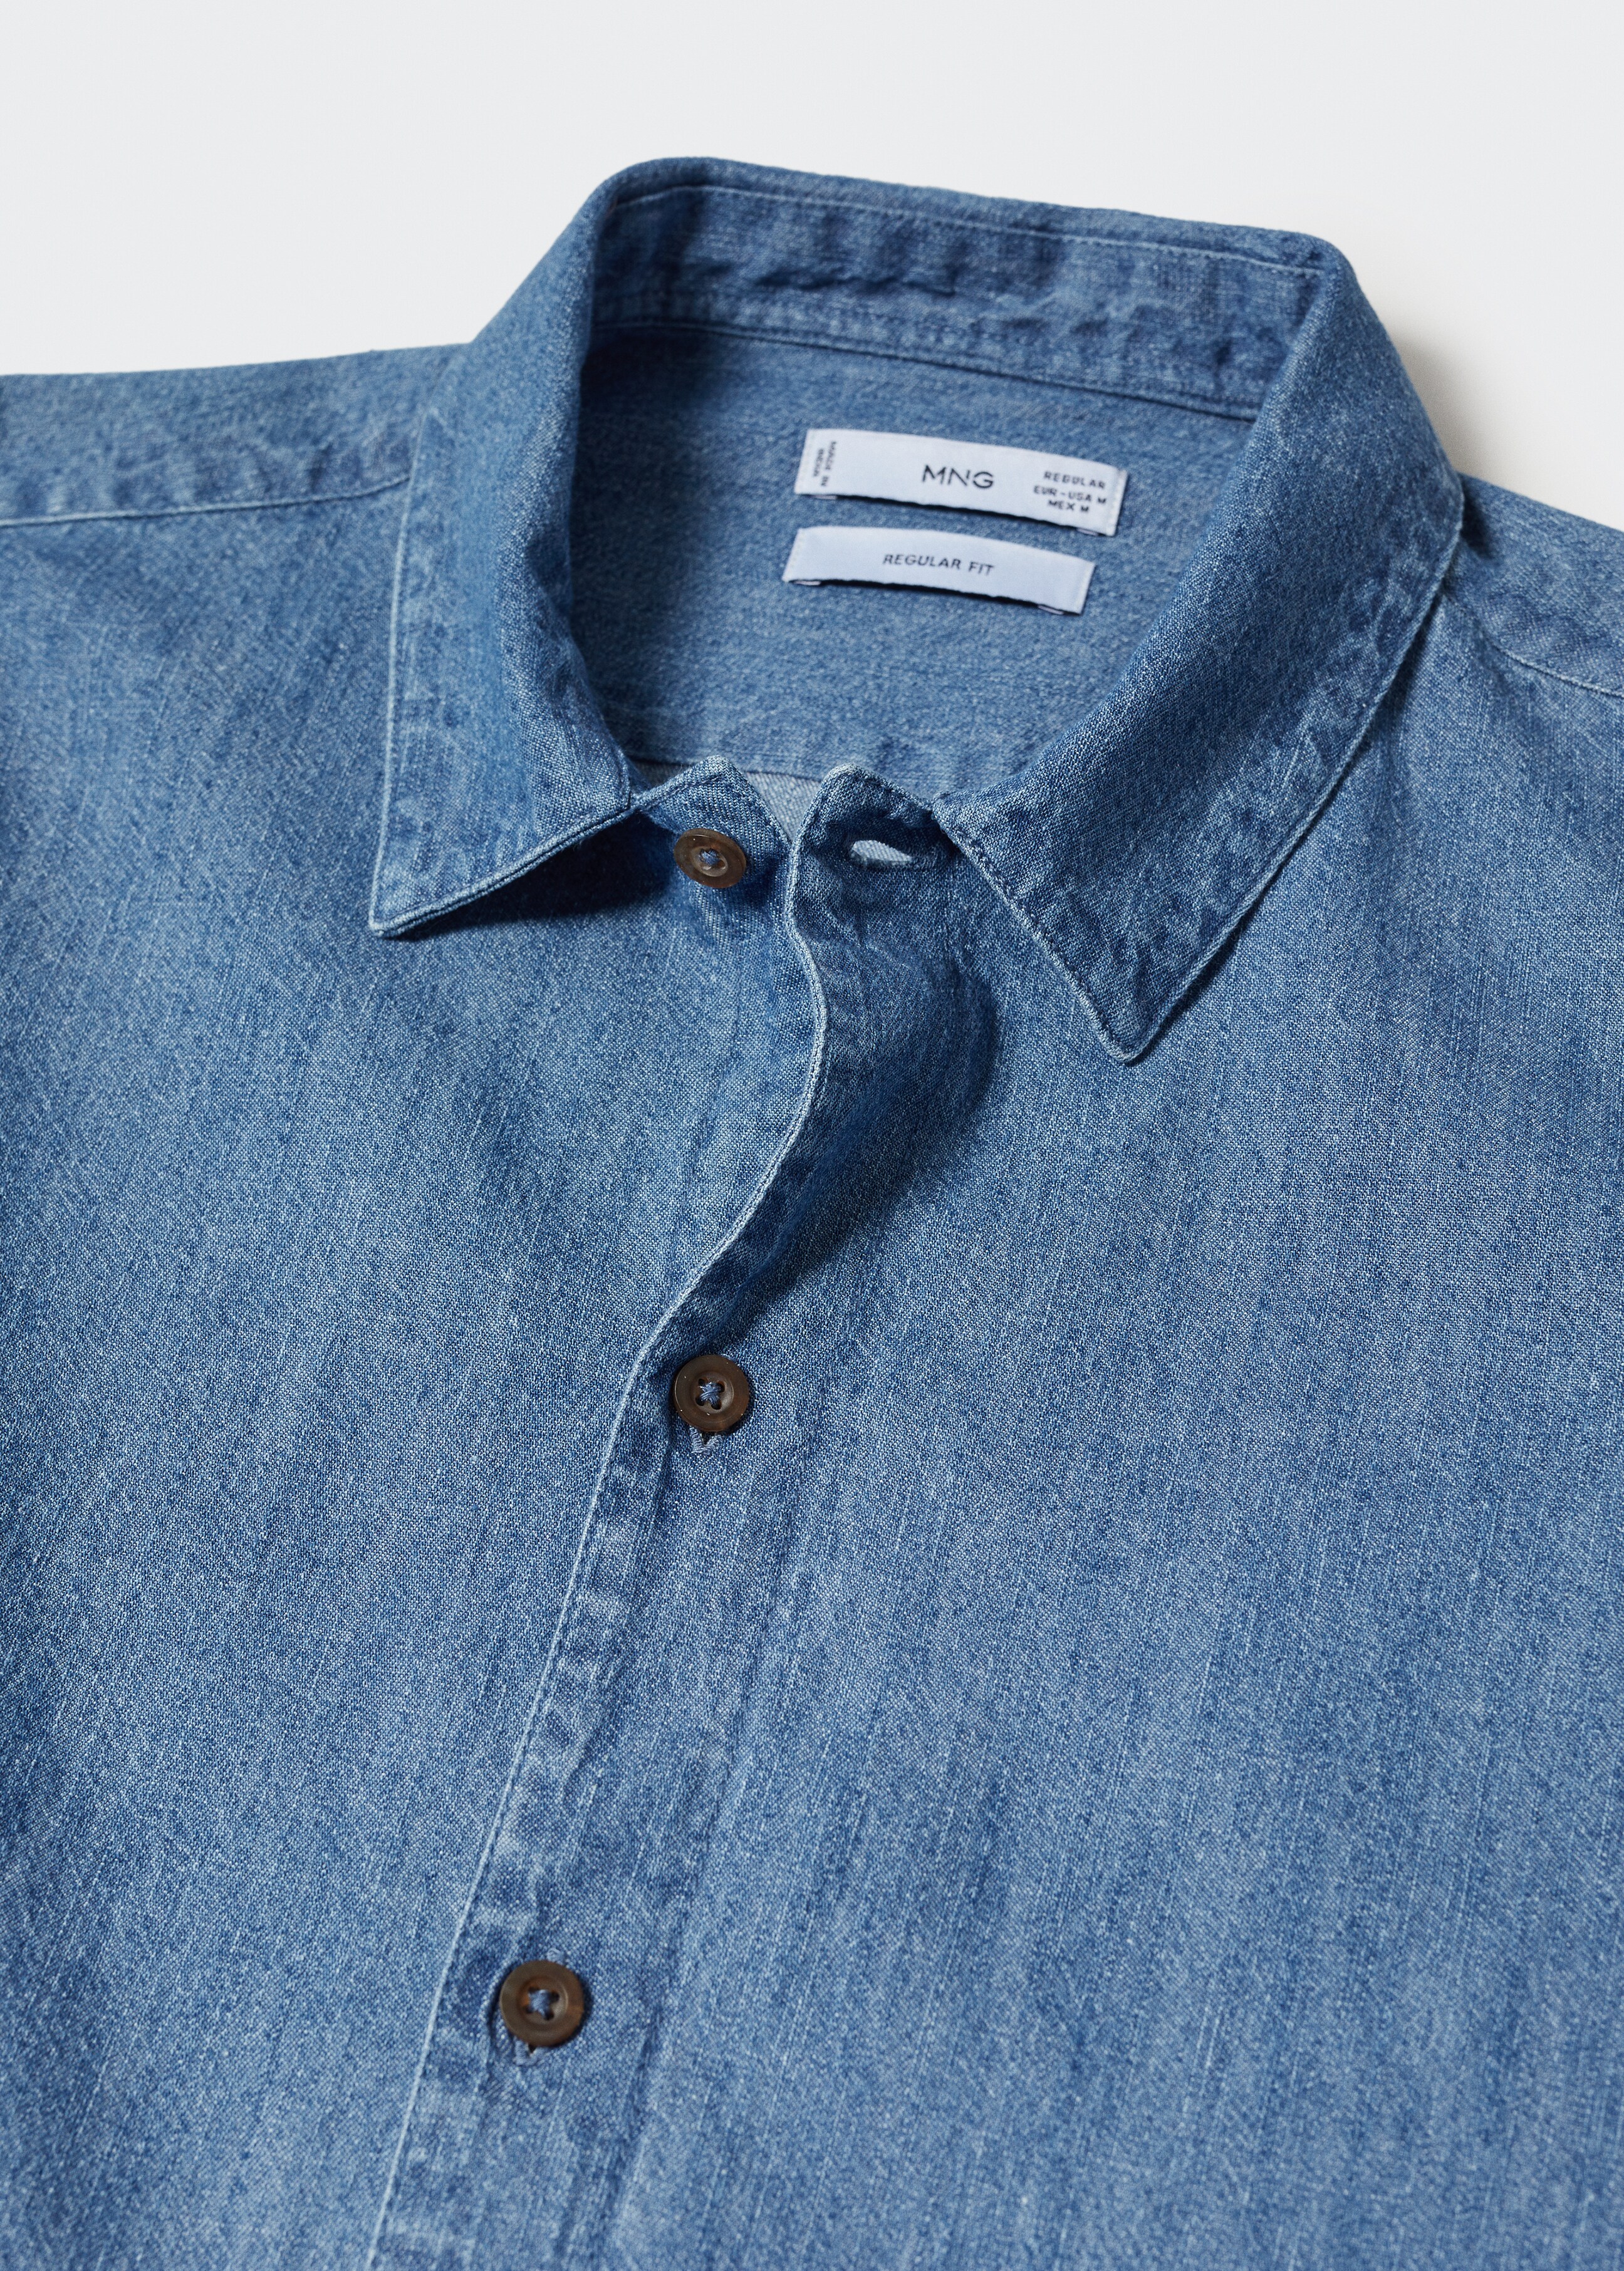 100% cotton chambray shirt - Details of the article 8